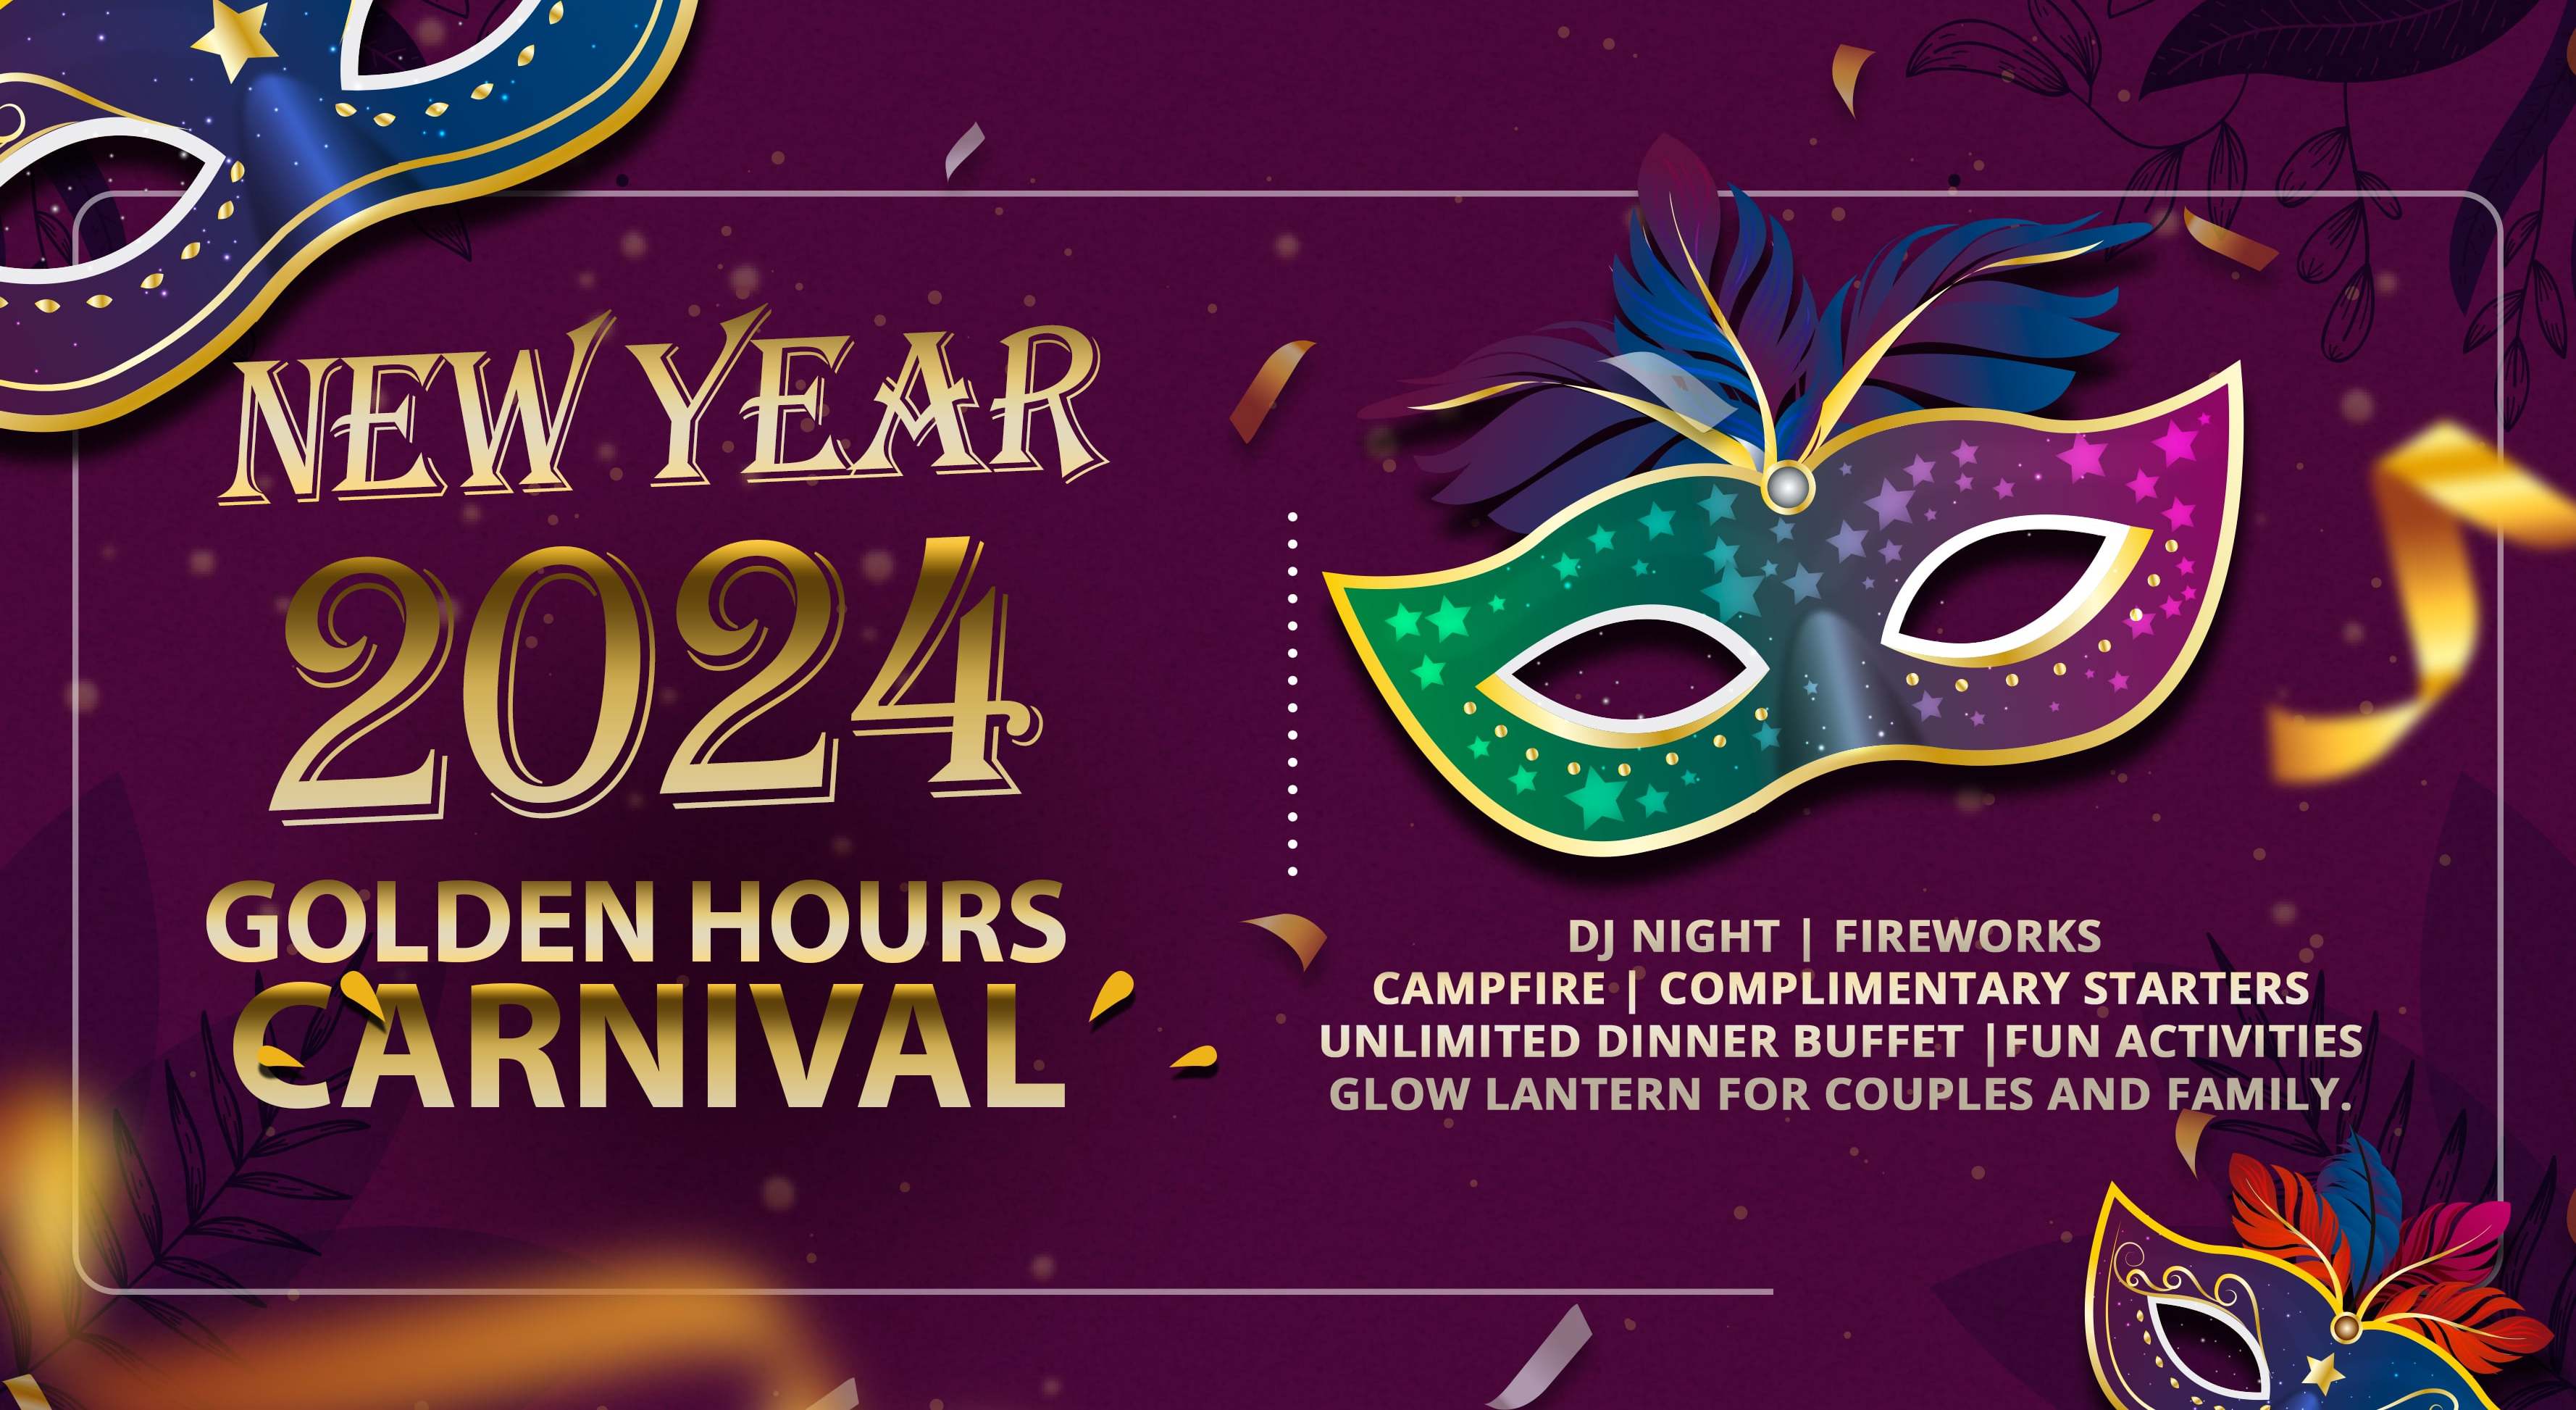 NEW YEAR PARTY 2024 GOLDEN HOURS CARNIVAL NY 2024